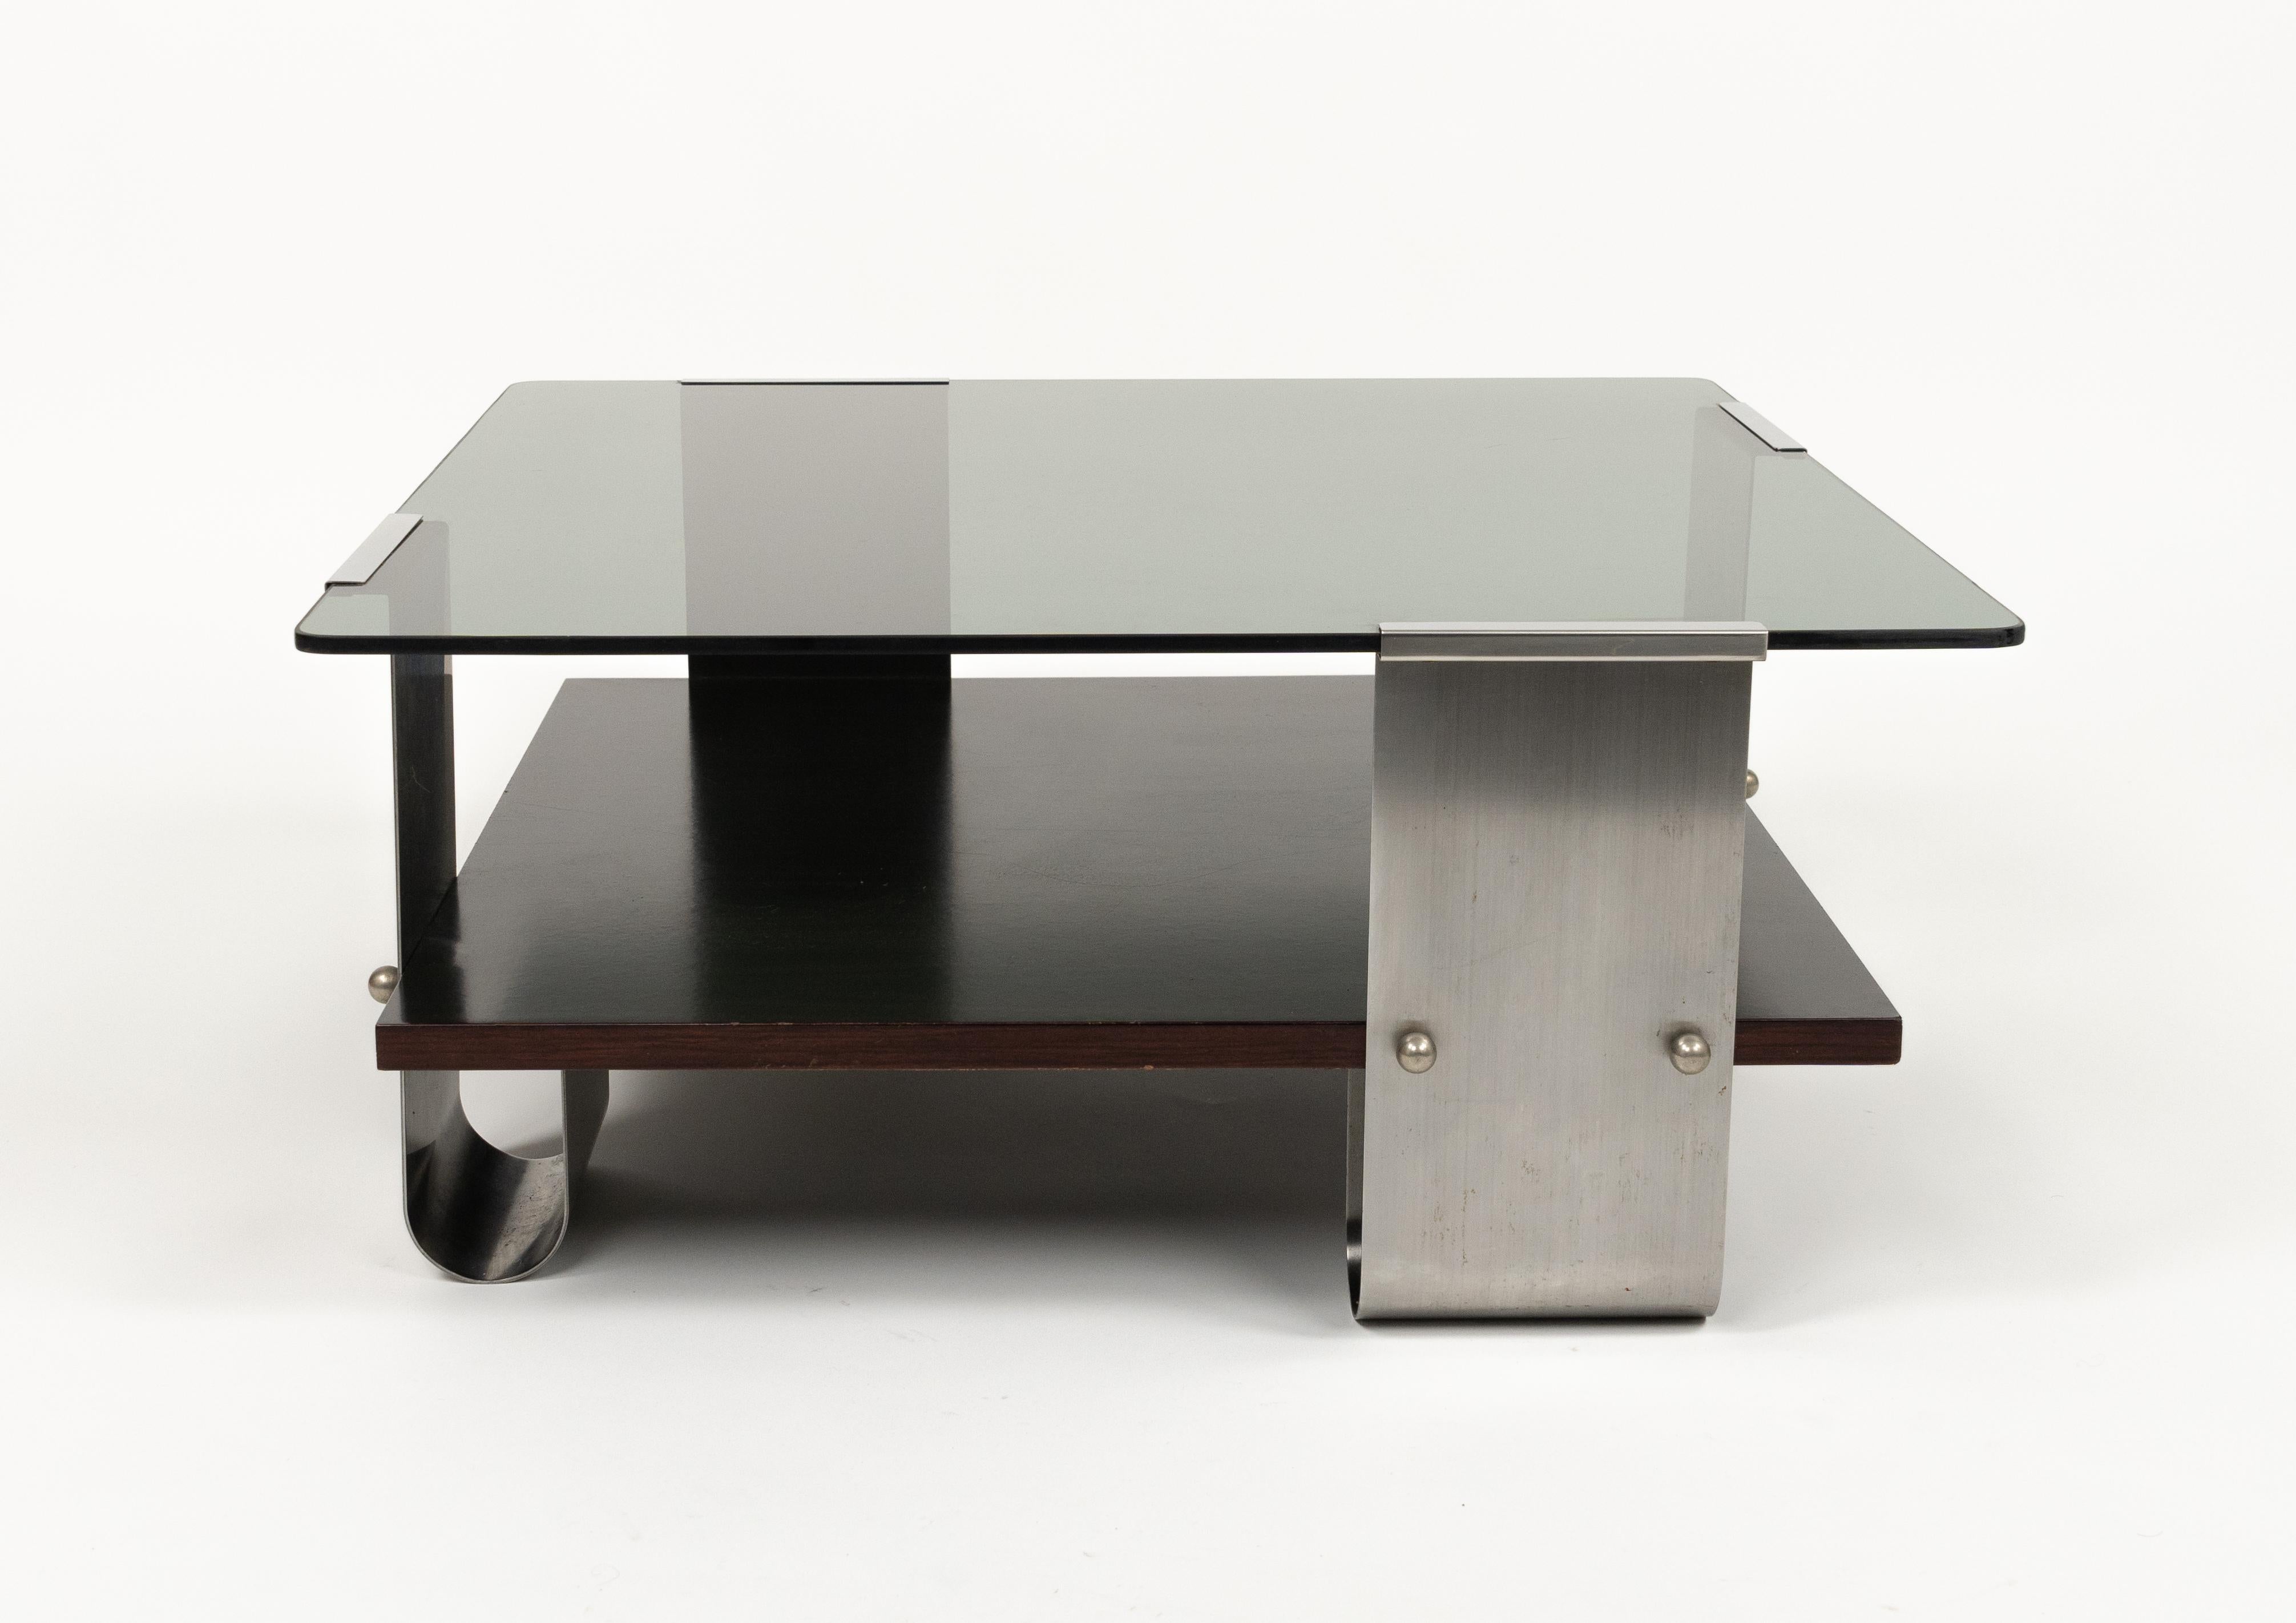 Metal Midcentury Coffee Table in Steel, Wood & Glass by Francois Monnet, France, 1970s For Sale